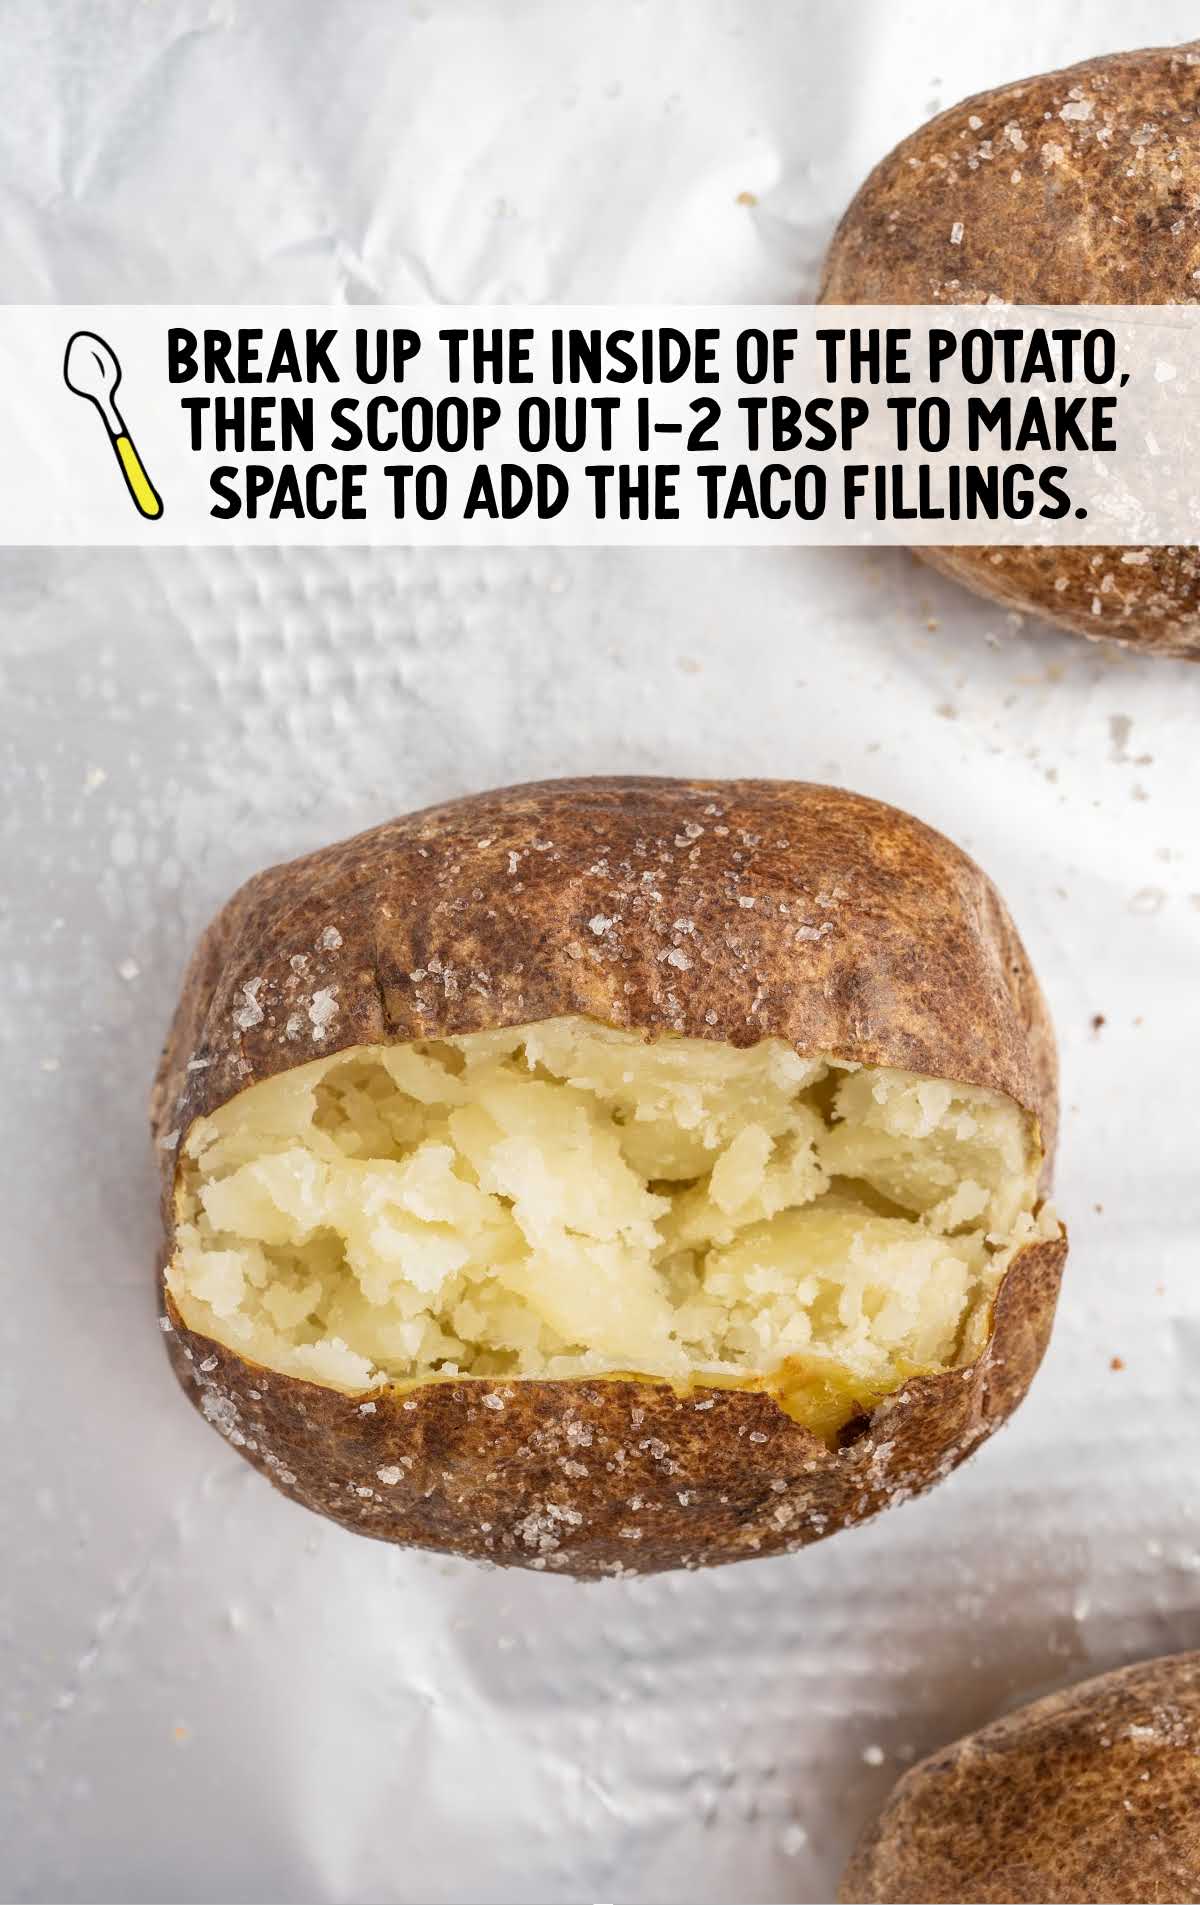 potato broken apart and added filling space